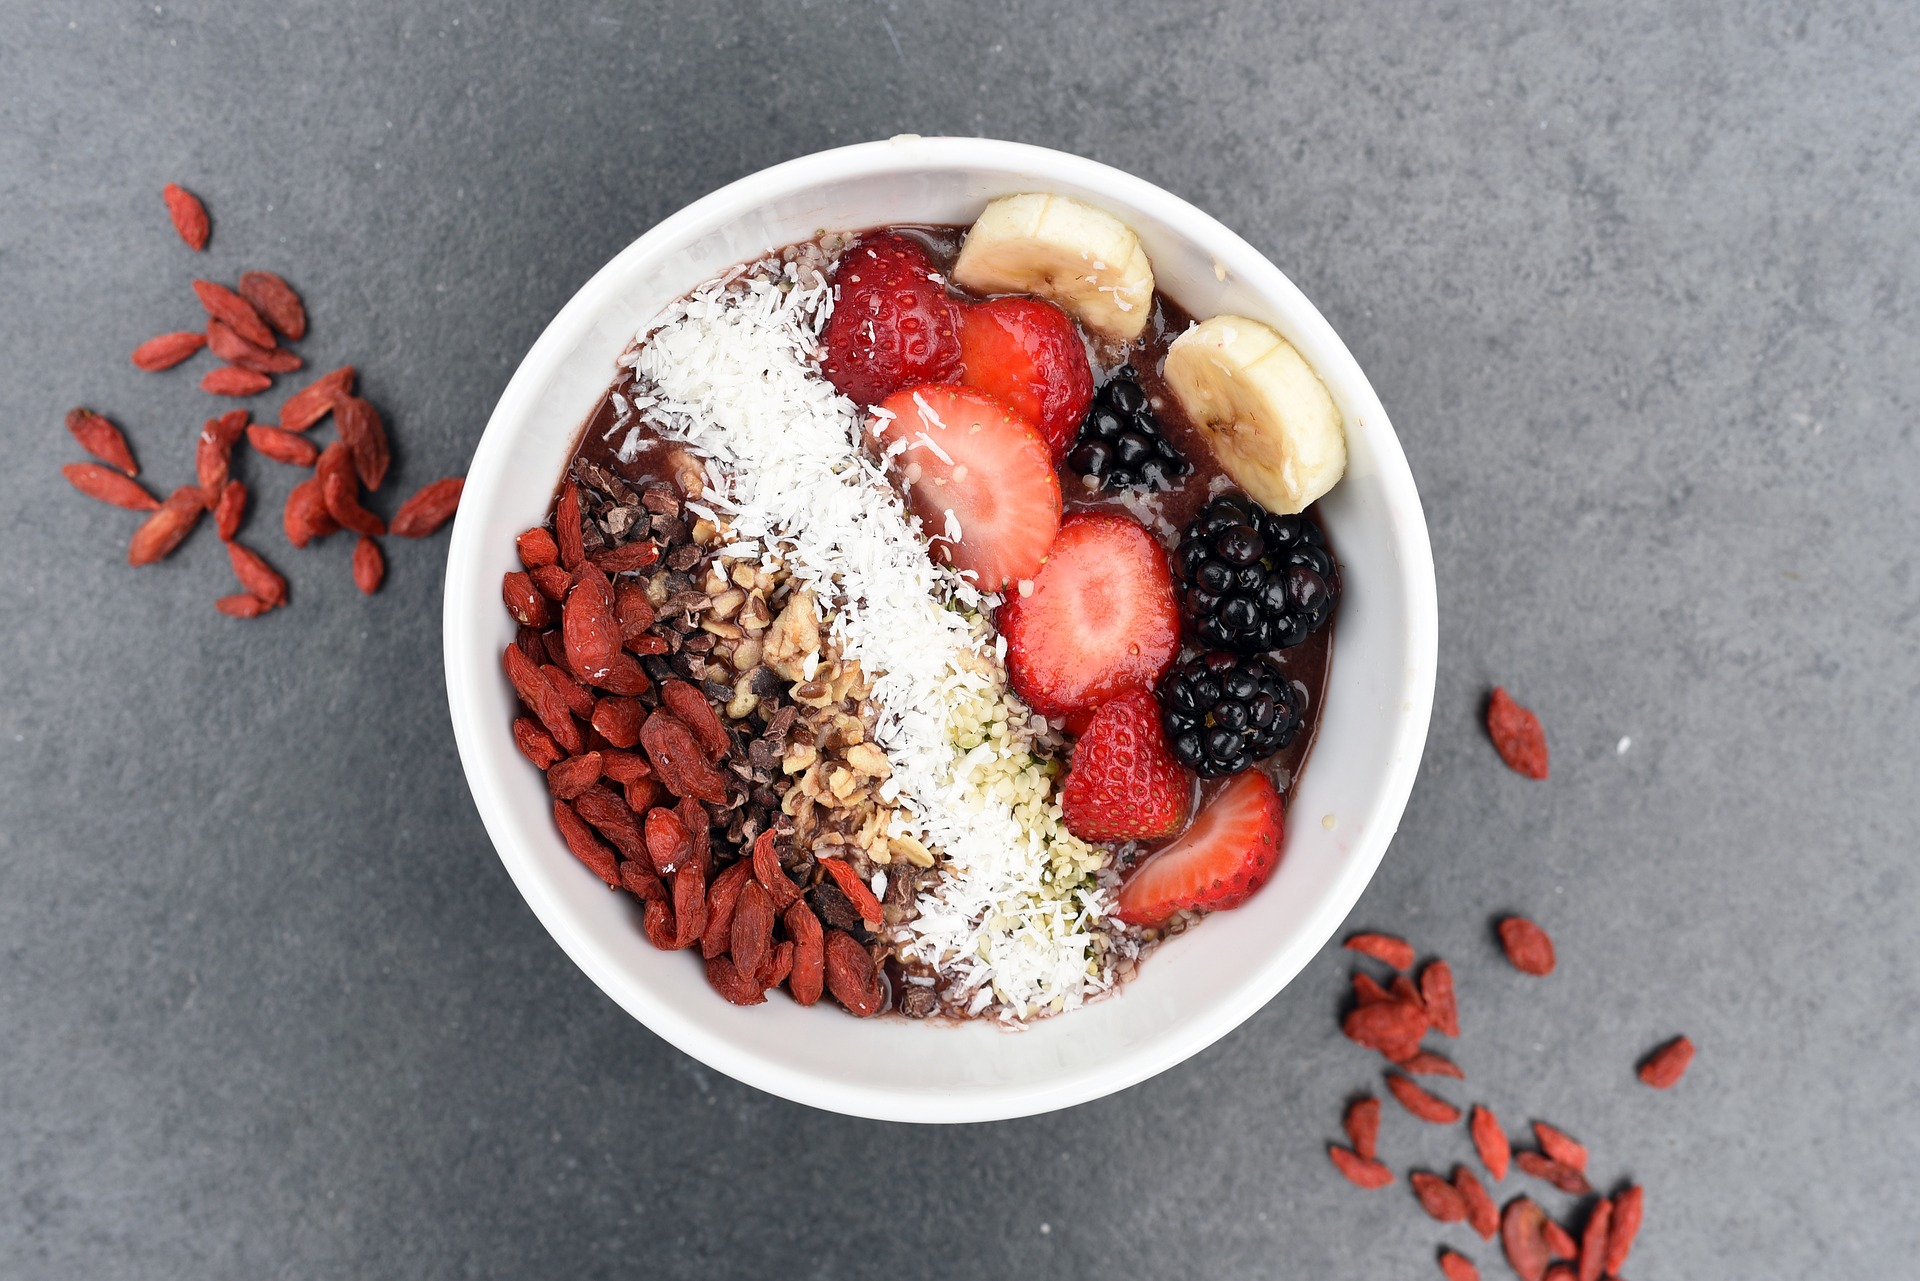 8 Breakfast Foods To Give Your Skin a Healthy Glow